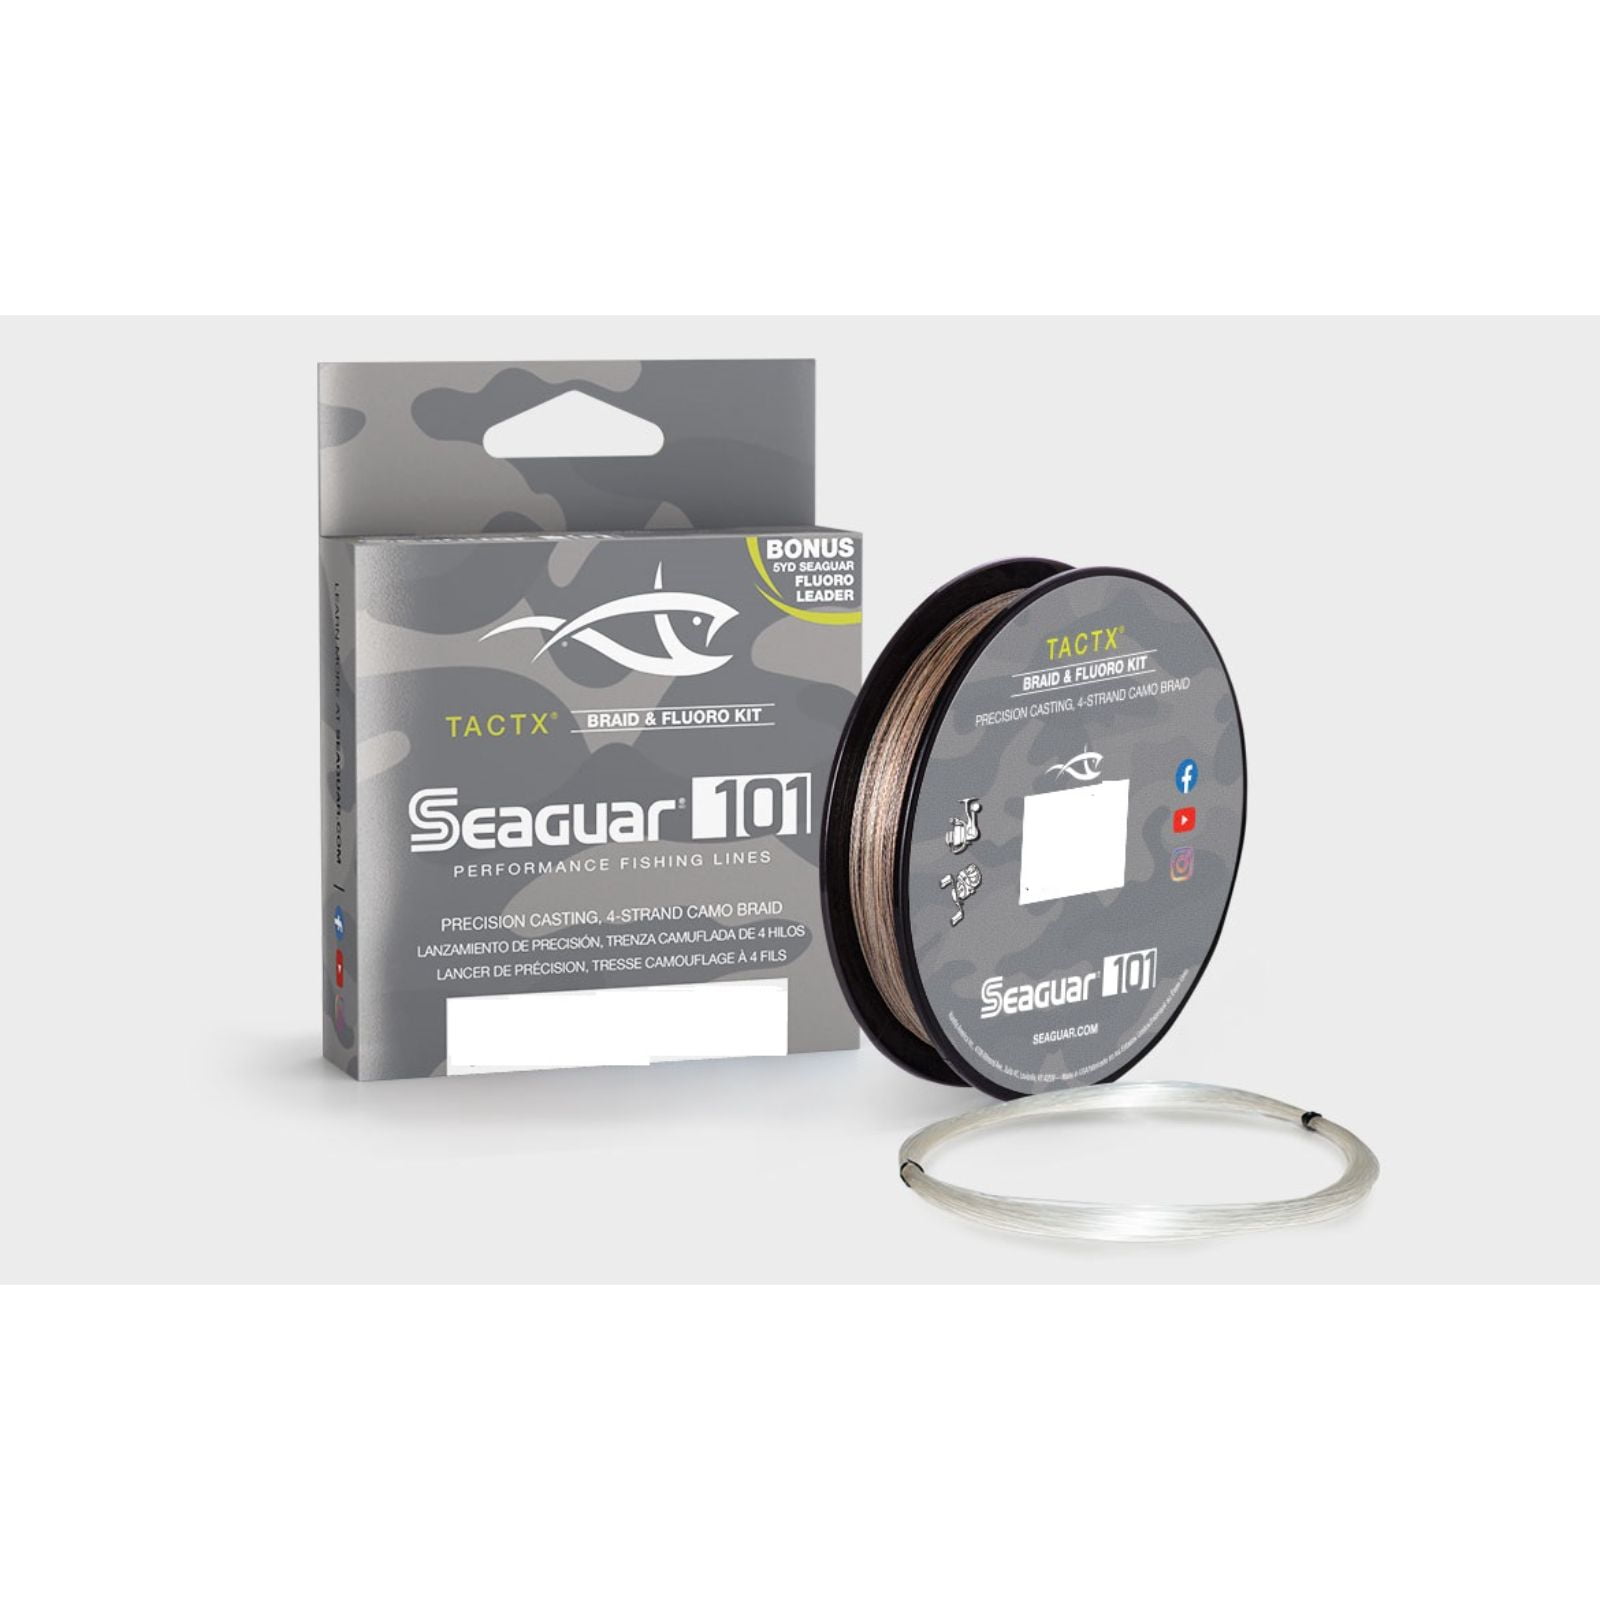 Seaguar 101 TACTX Braided Camo Fishing Line & Fluoro Kit, with